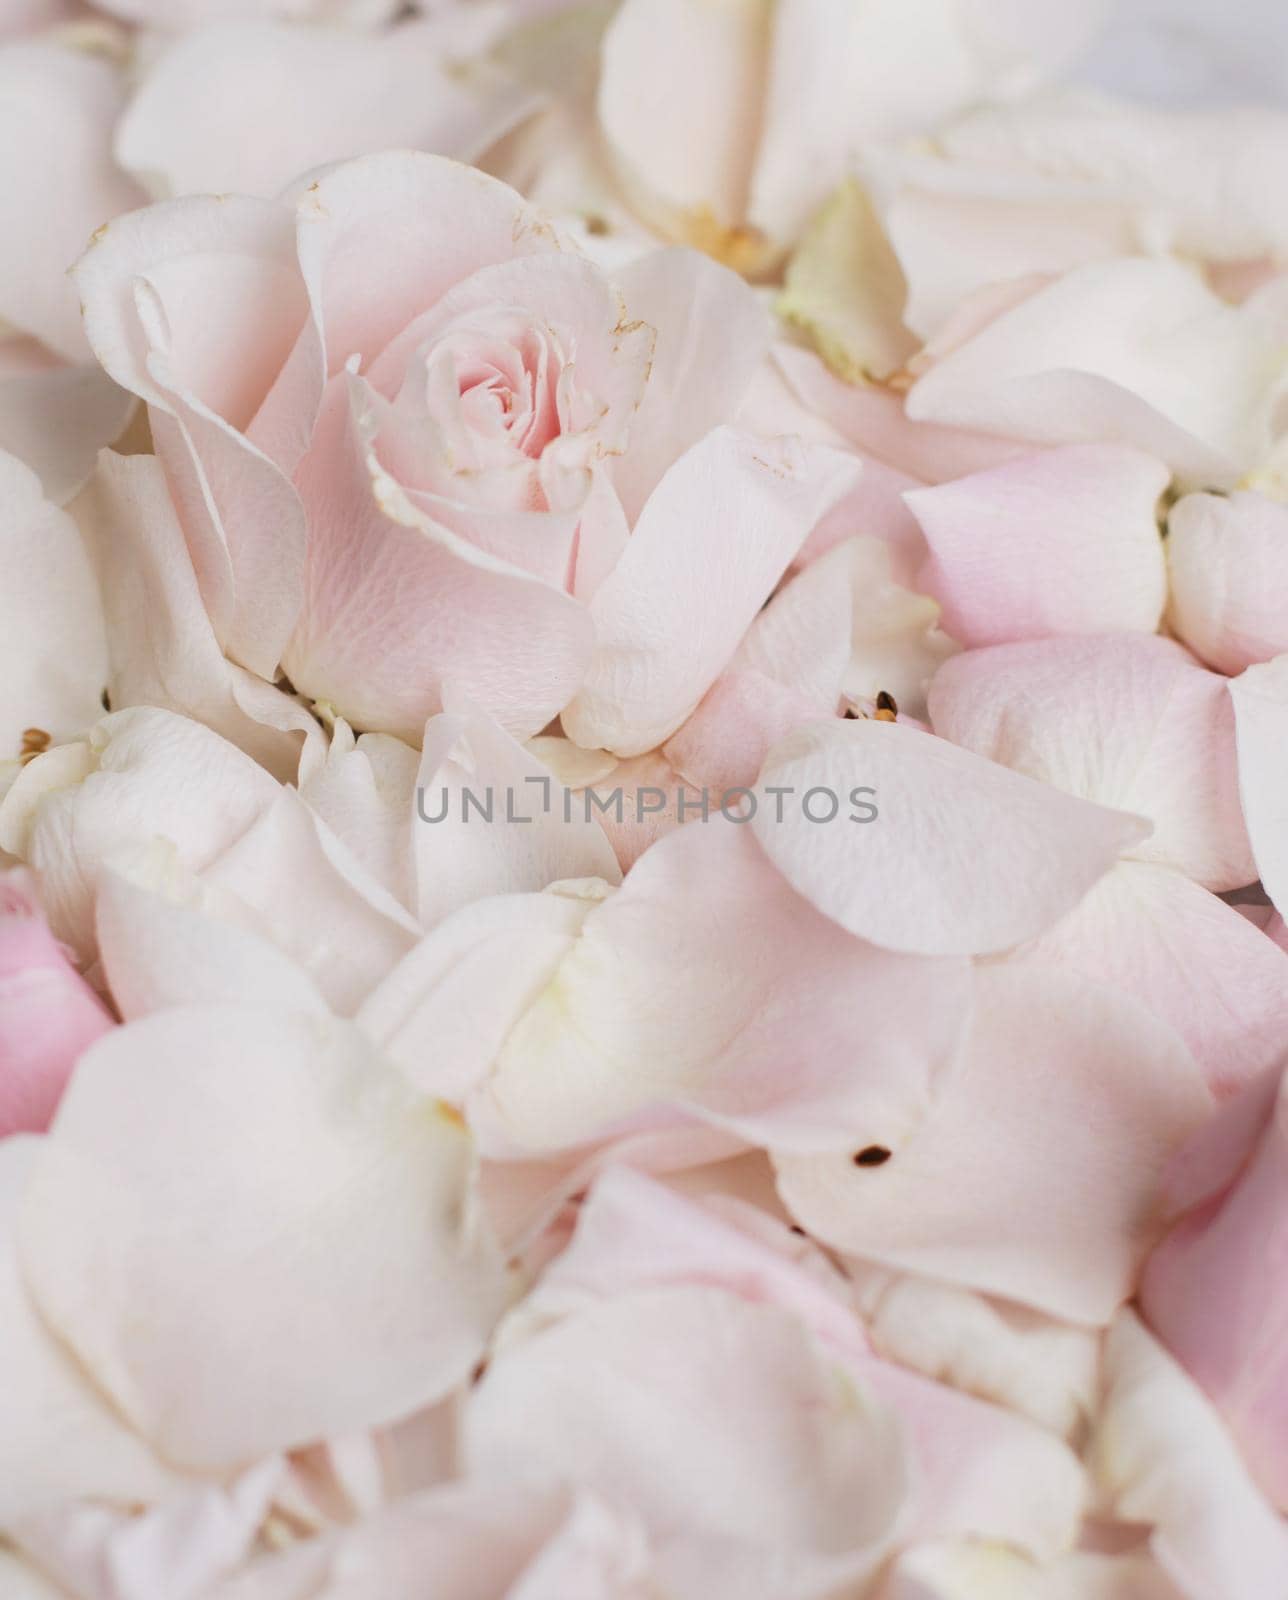 rose flower petals on marble - wedding, holiday and floral garden styled concept